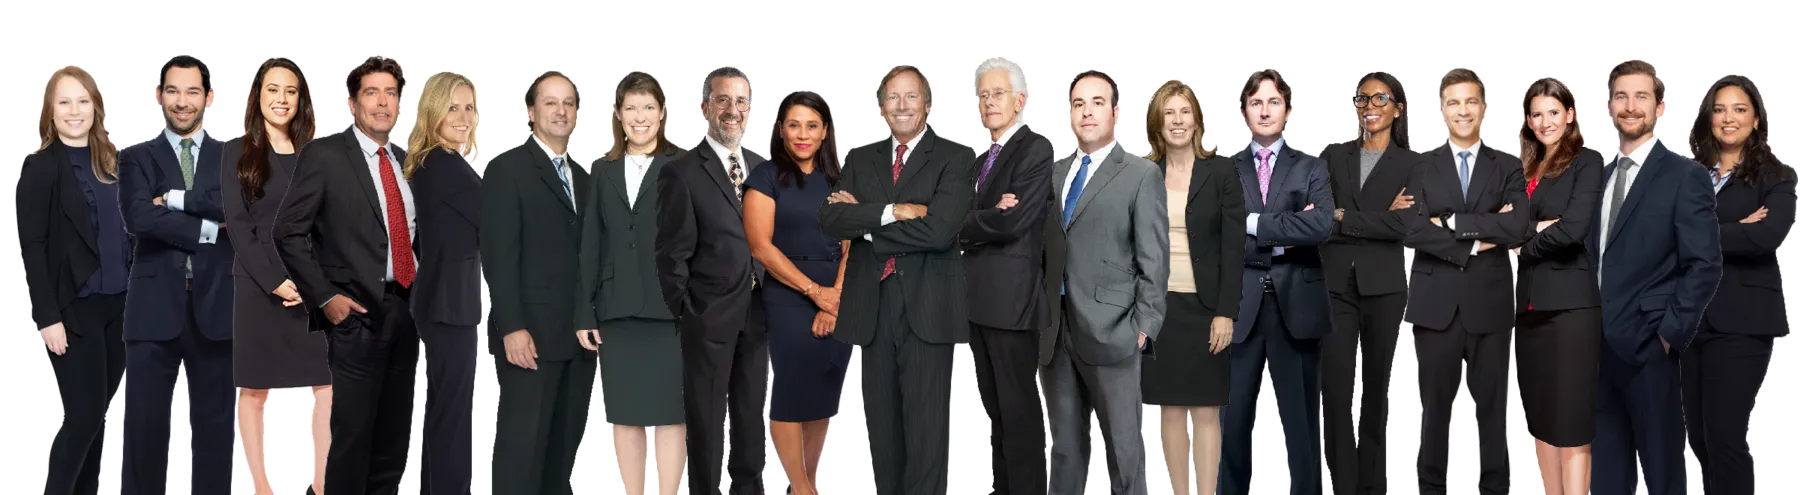 Attorney lineup